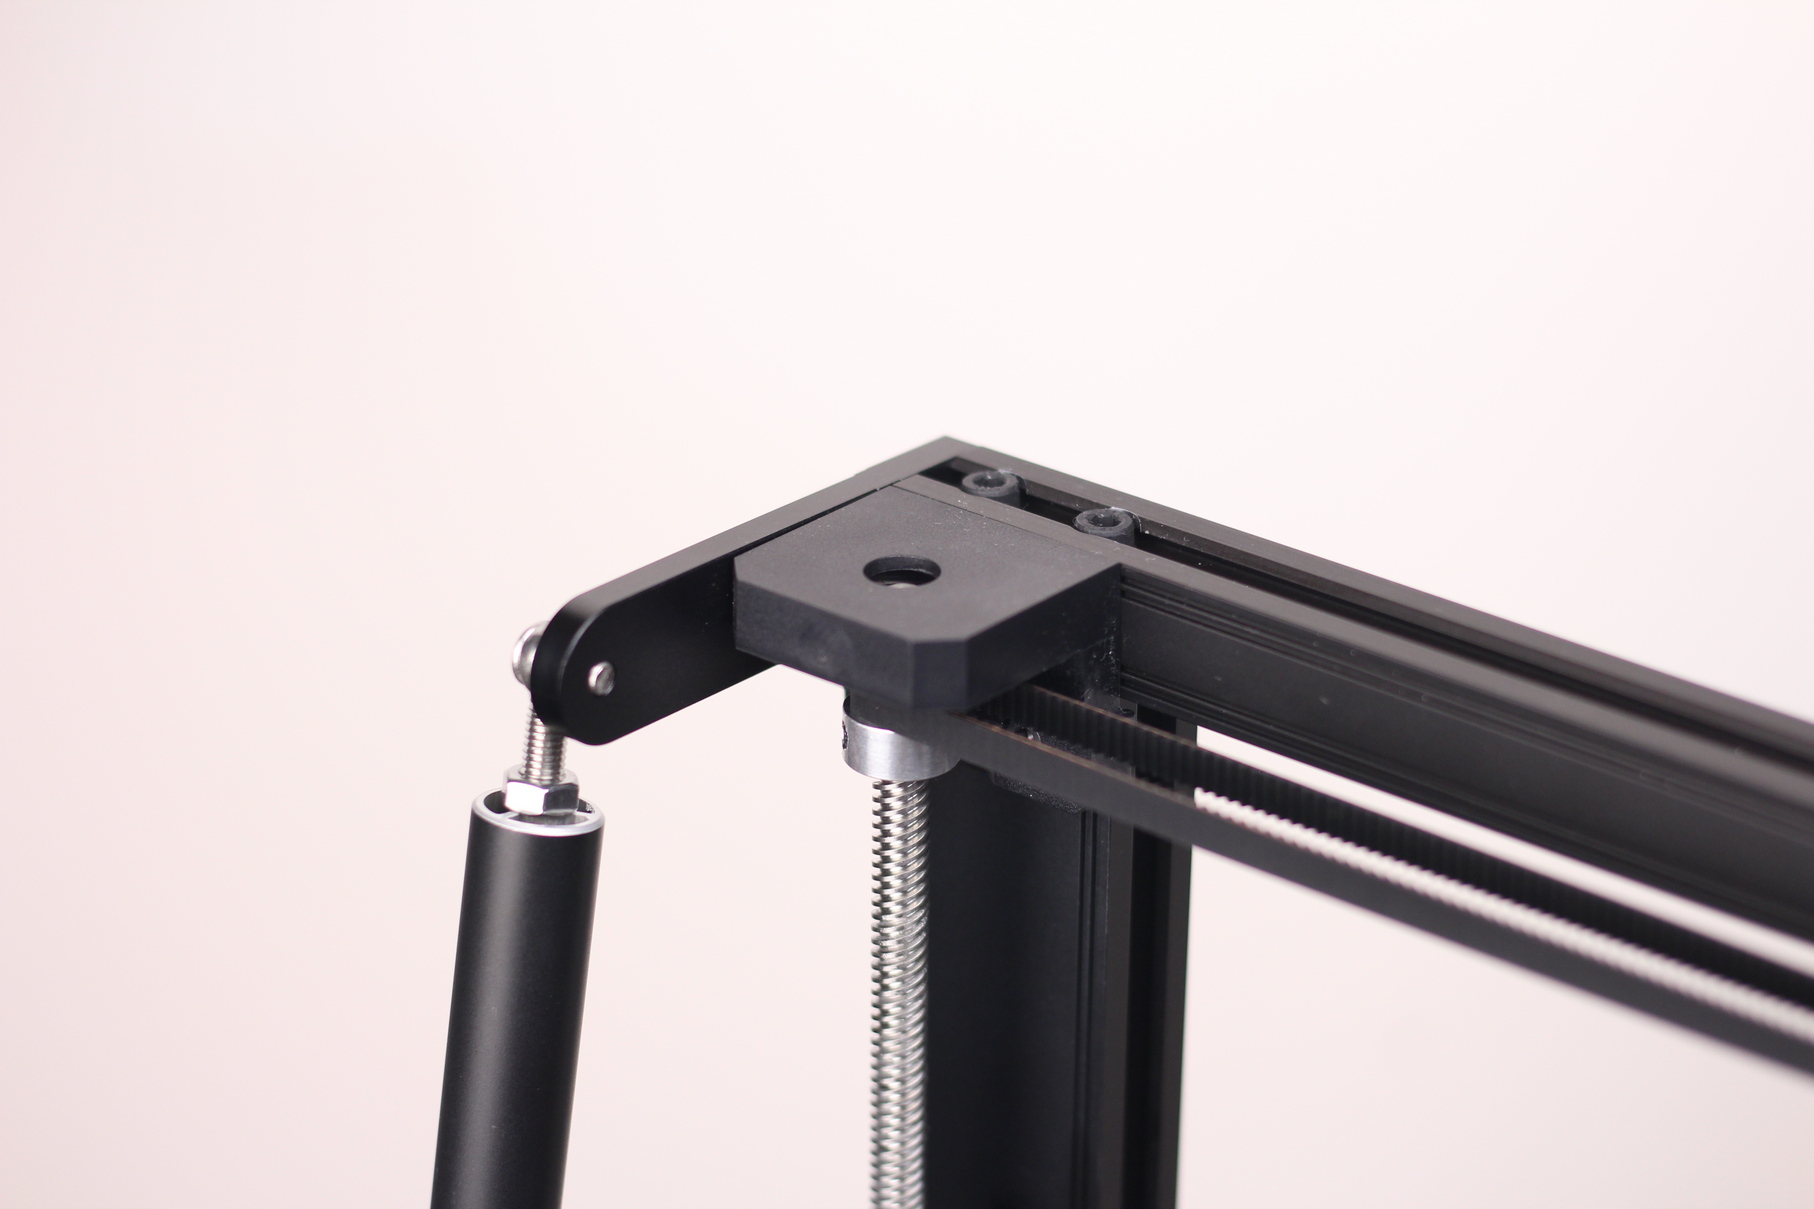 Dual Z axis CR 10 Smart | Creality CR-10 Smart Review: How smart it really is?